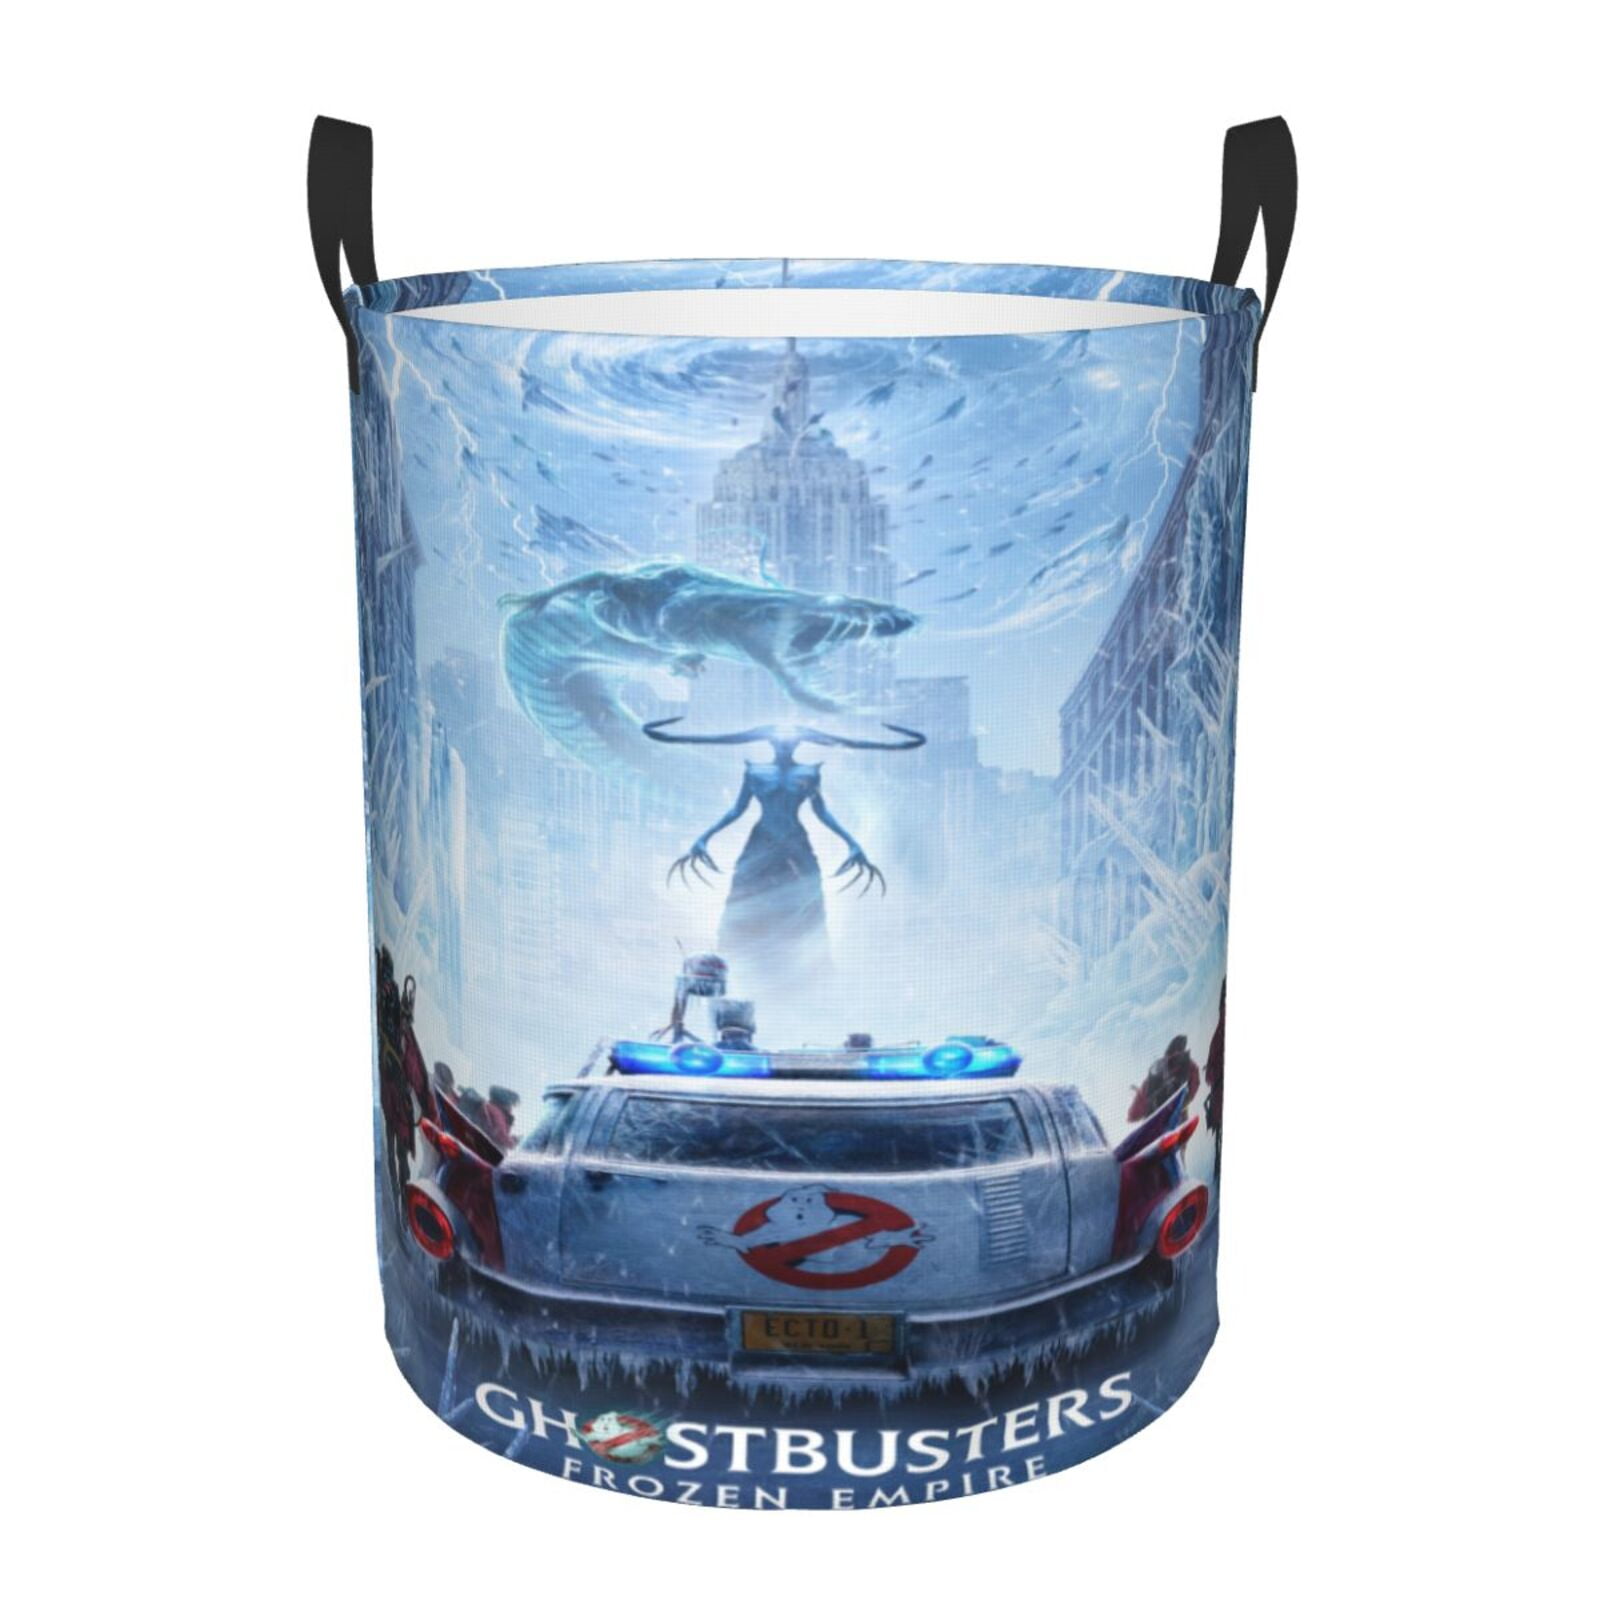 Film Ghostbusters Large Laundry Basket With Handle, Collapsible Laundry ...